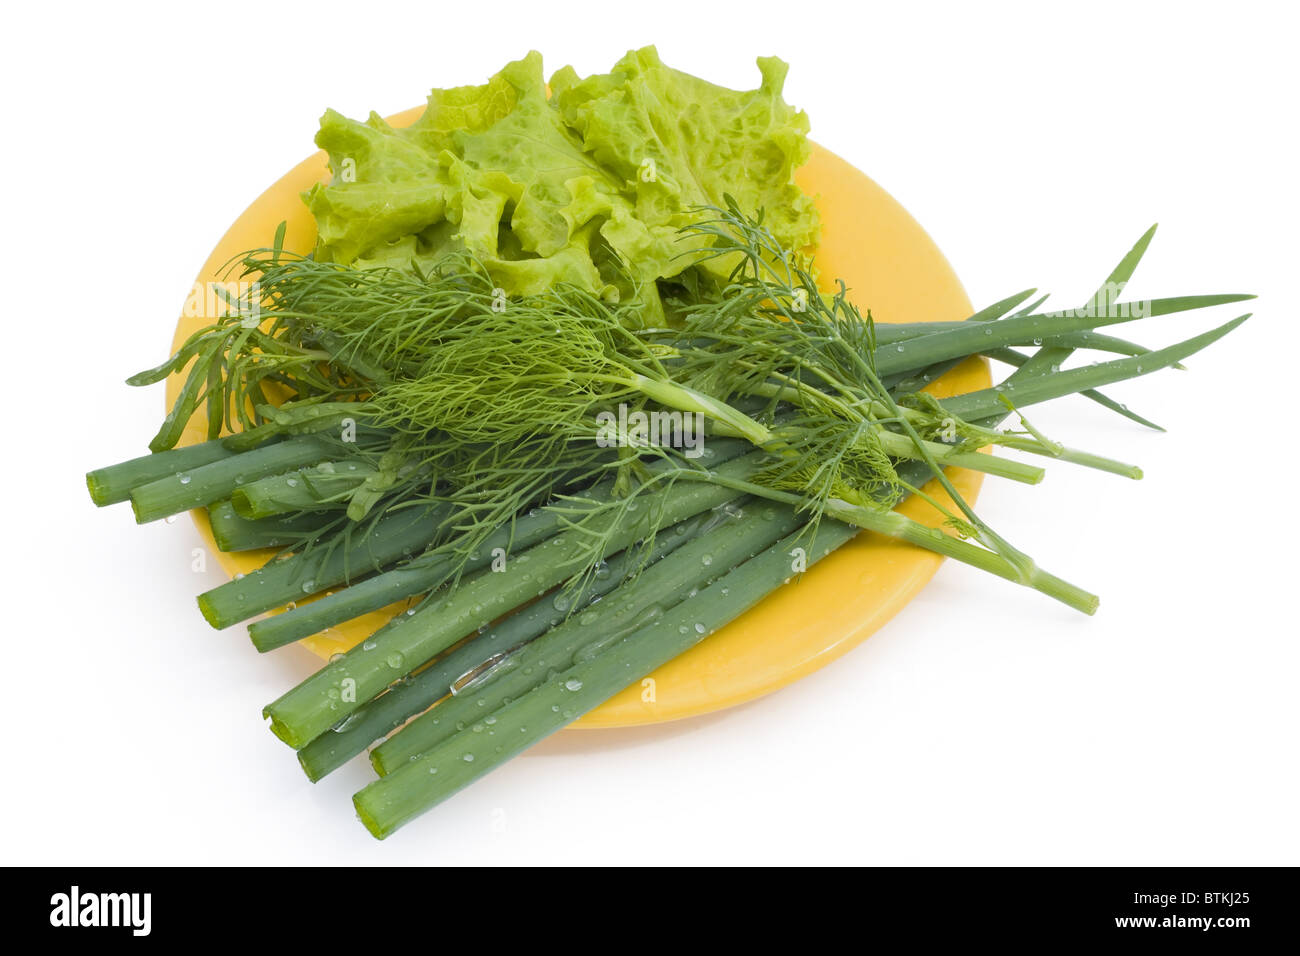 Green onions, salad and fennel Stock Photo